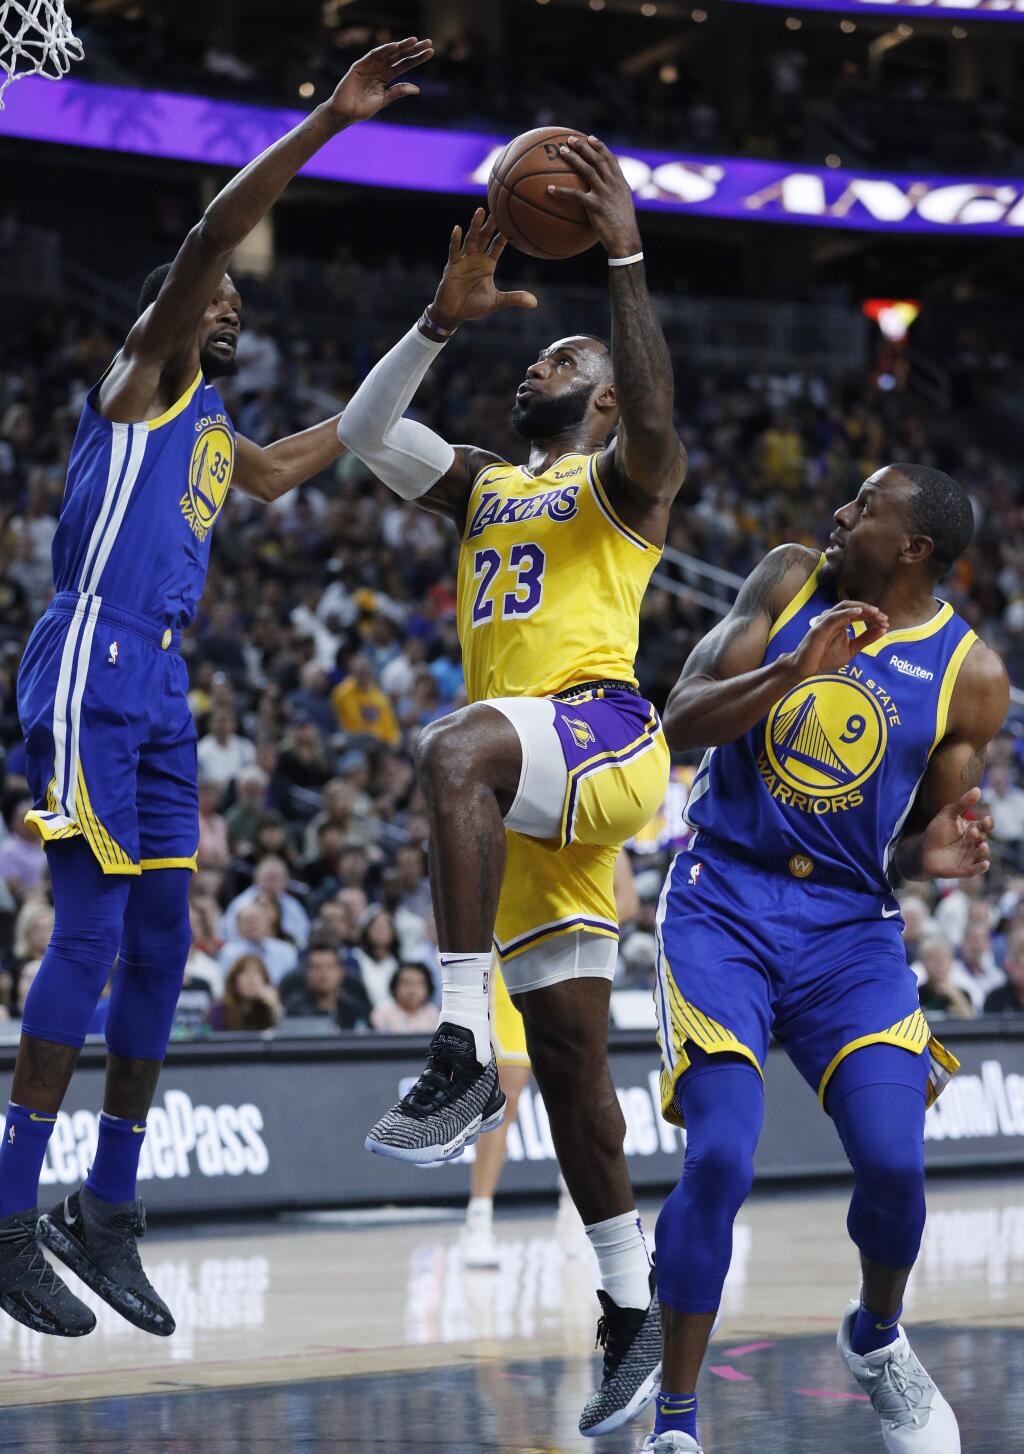 Los Angeles Lakers forward LeBron James (23) shoots between Golden State Warriors forward Kevin Durant, left, and guard Andre Iguodala during the first half of an NBA preseason basketball game Wednesday, Oct. 10, 2018, in Las Vegas. (AP Photo/John Locher)